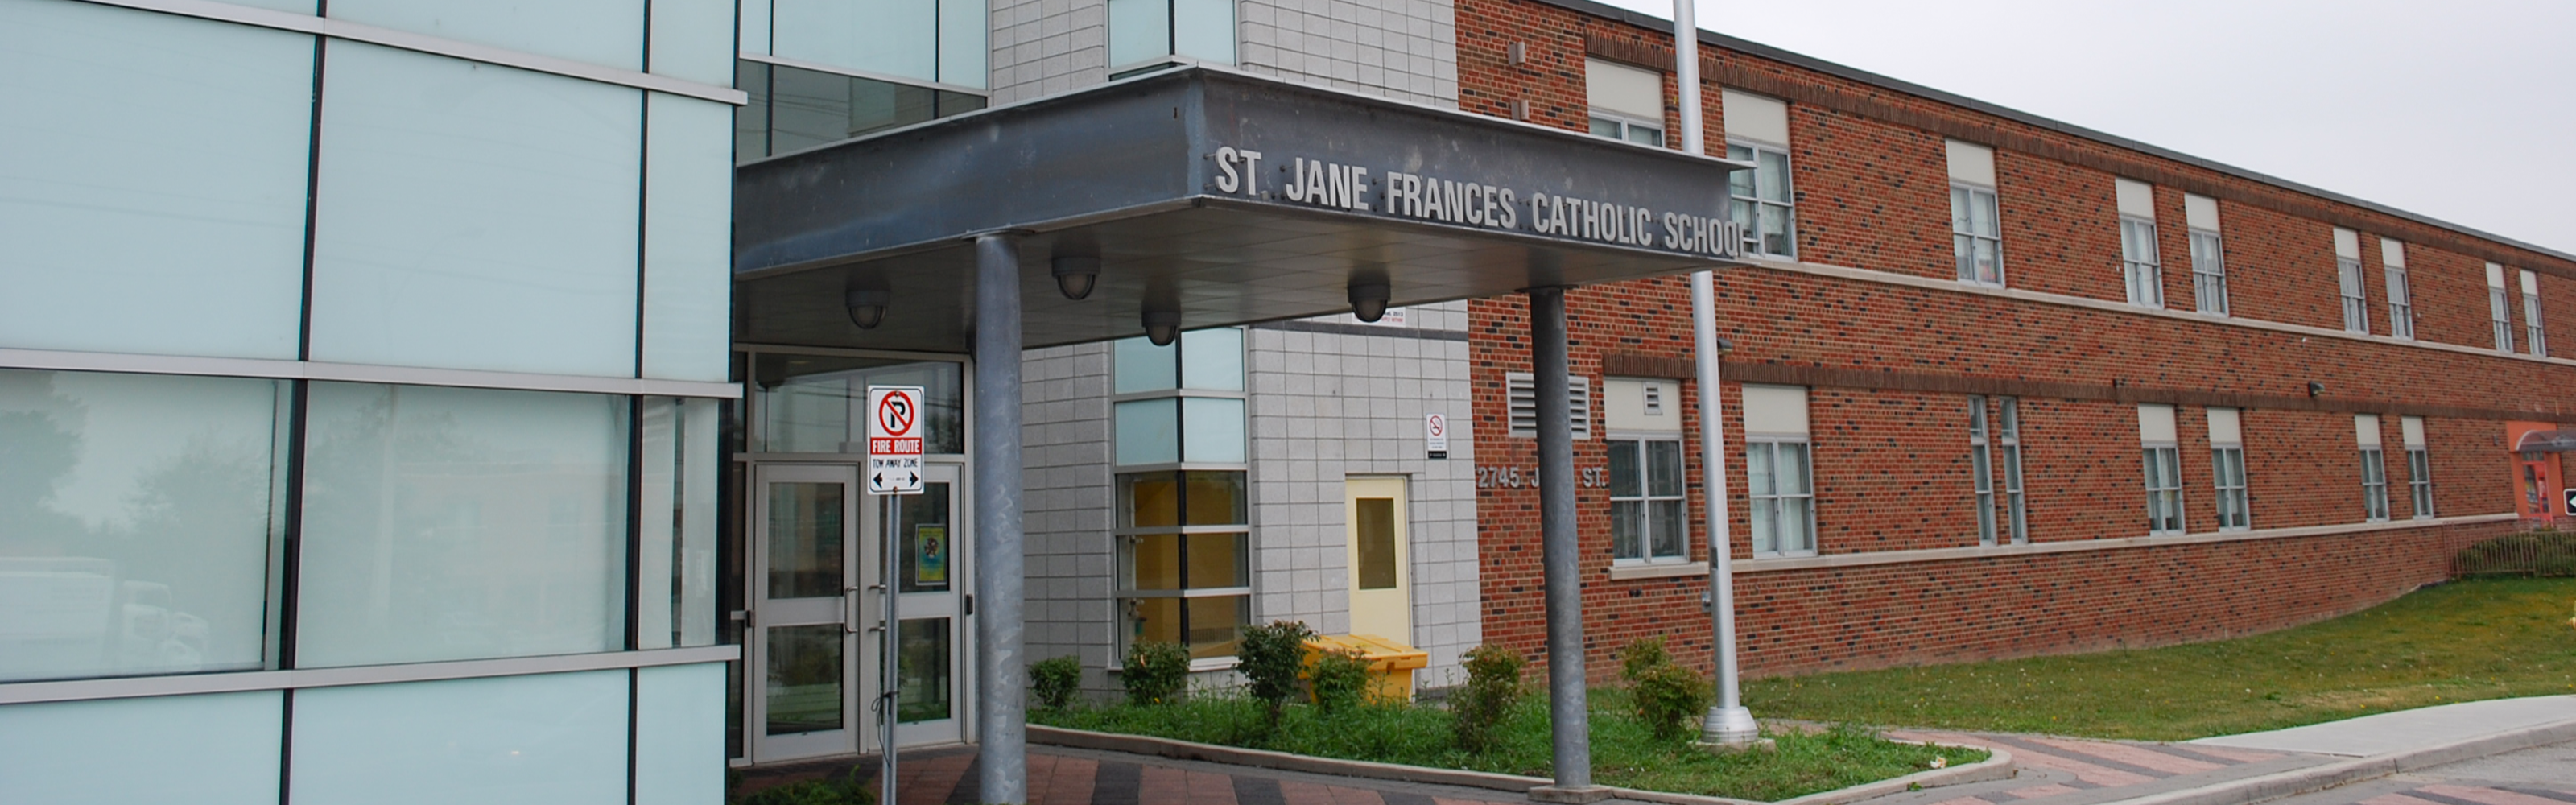 The front of the St. Jane Frances Catholic School building.